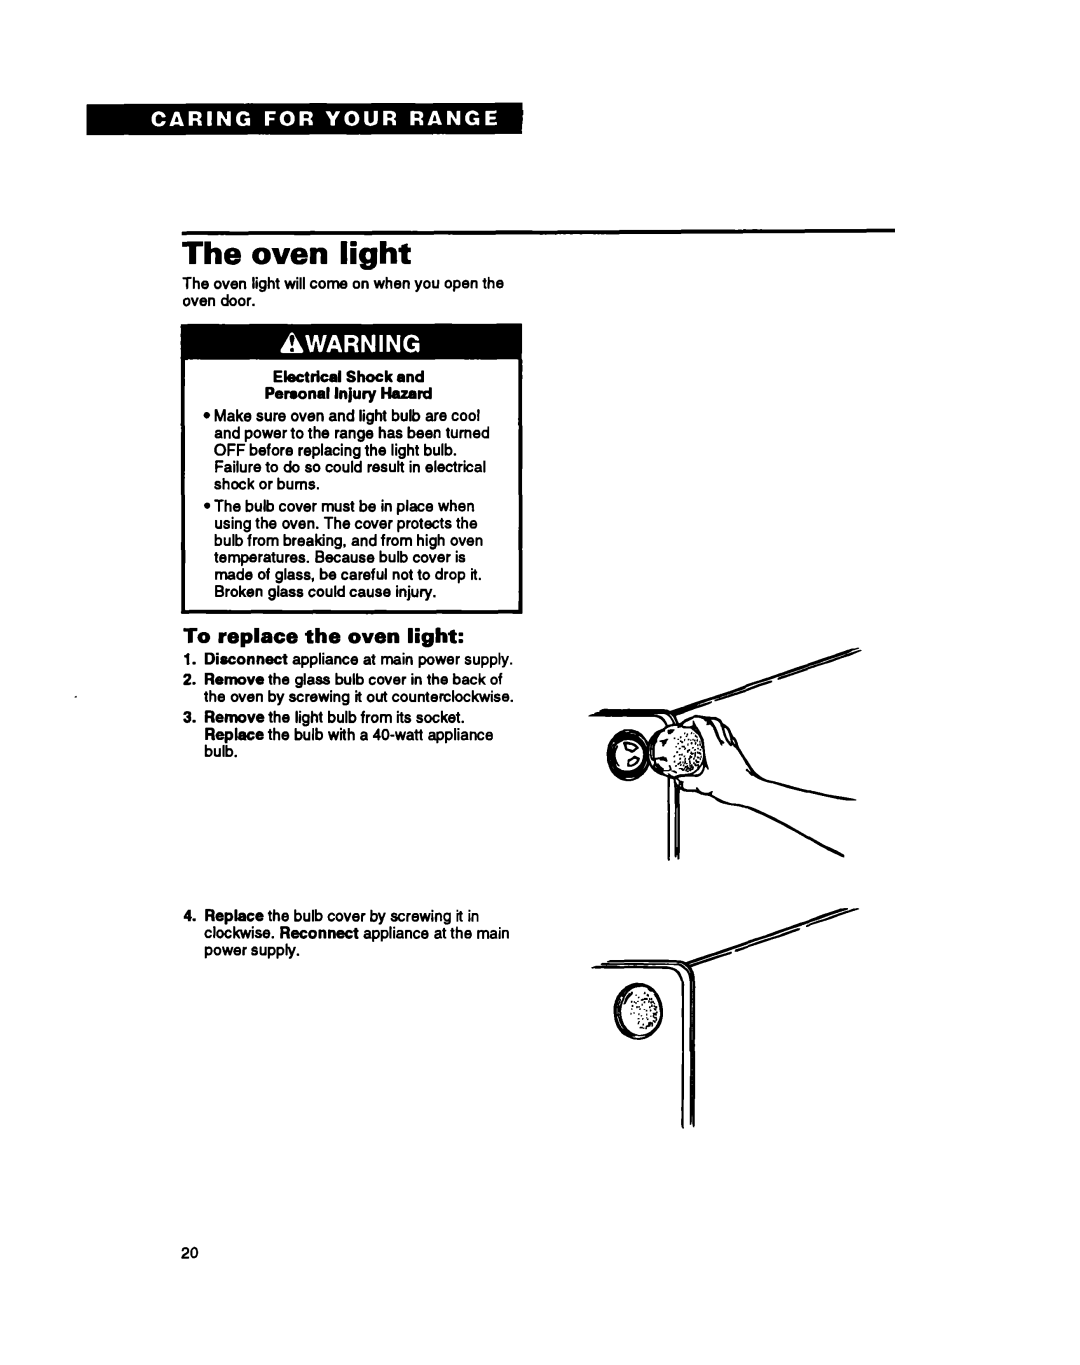 Whirlpool 336, RS600BXY, Range important safety instructions The oven light, To replace the oven light 